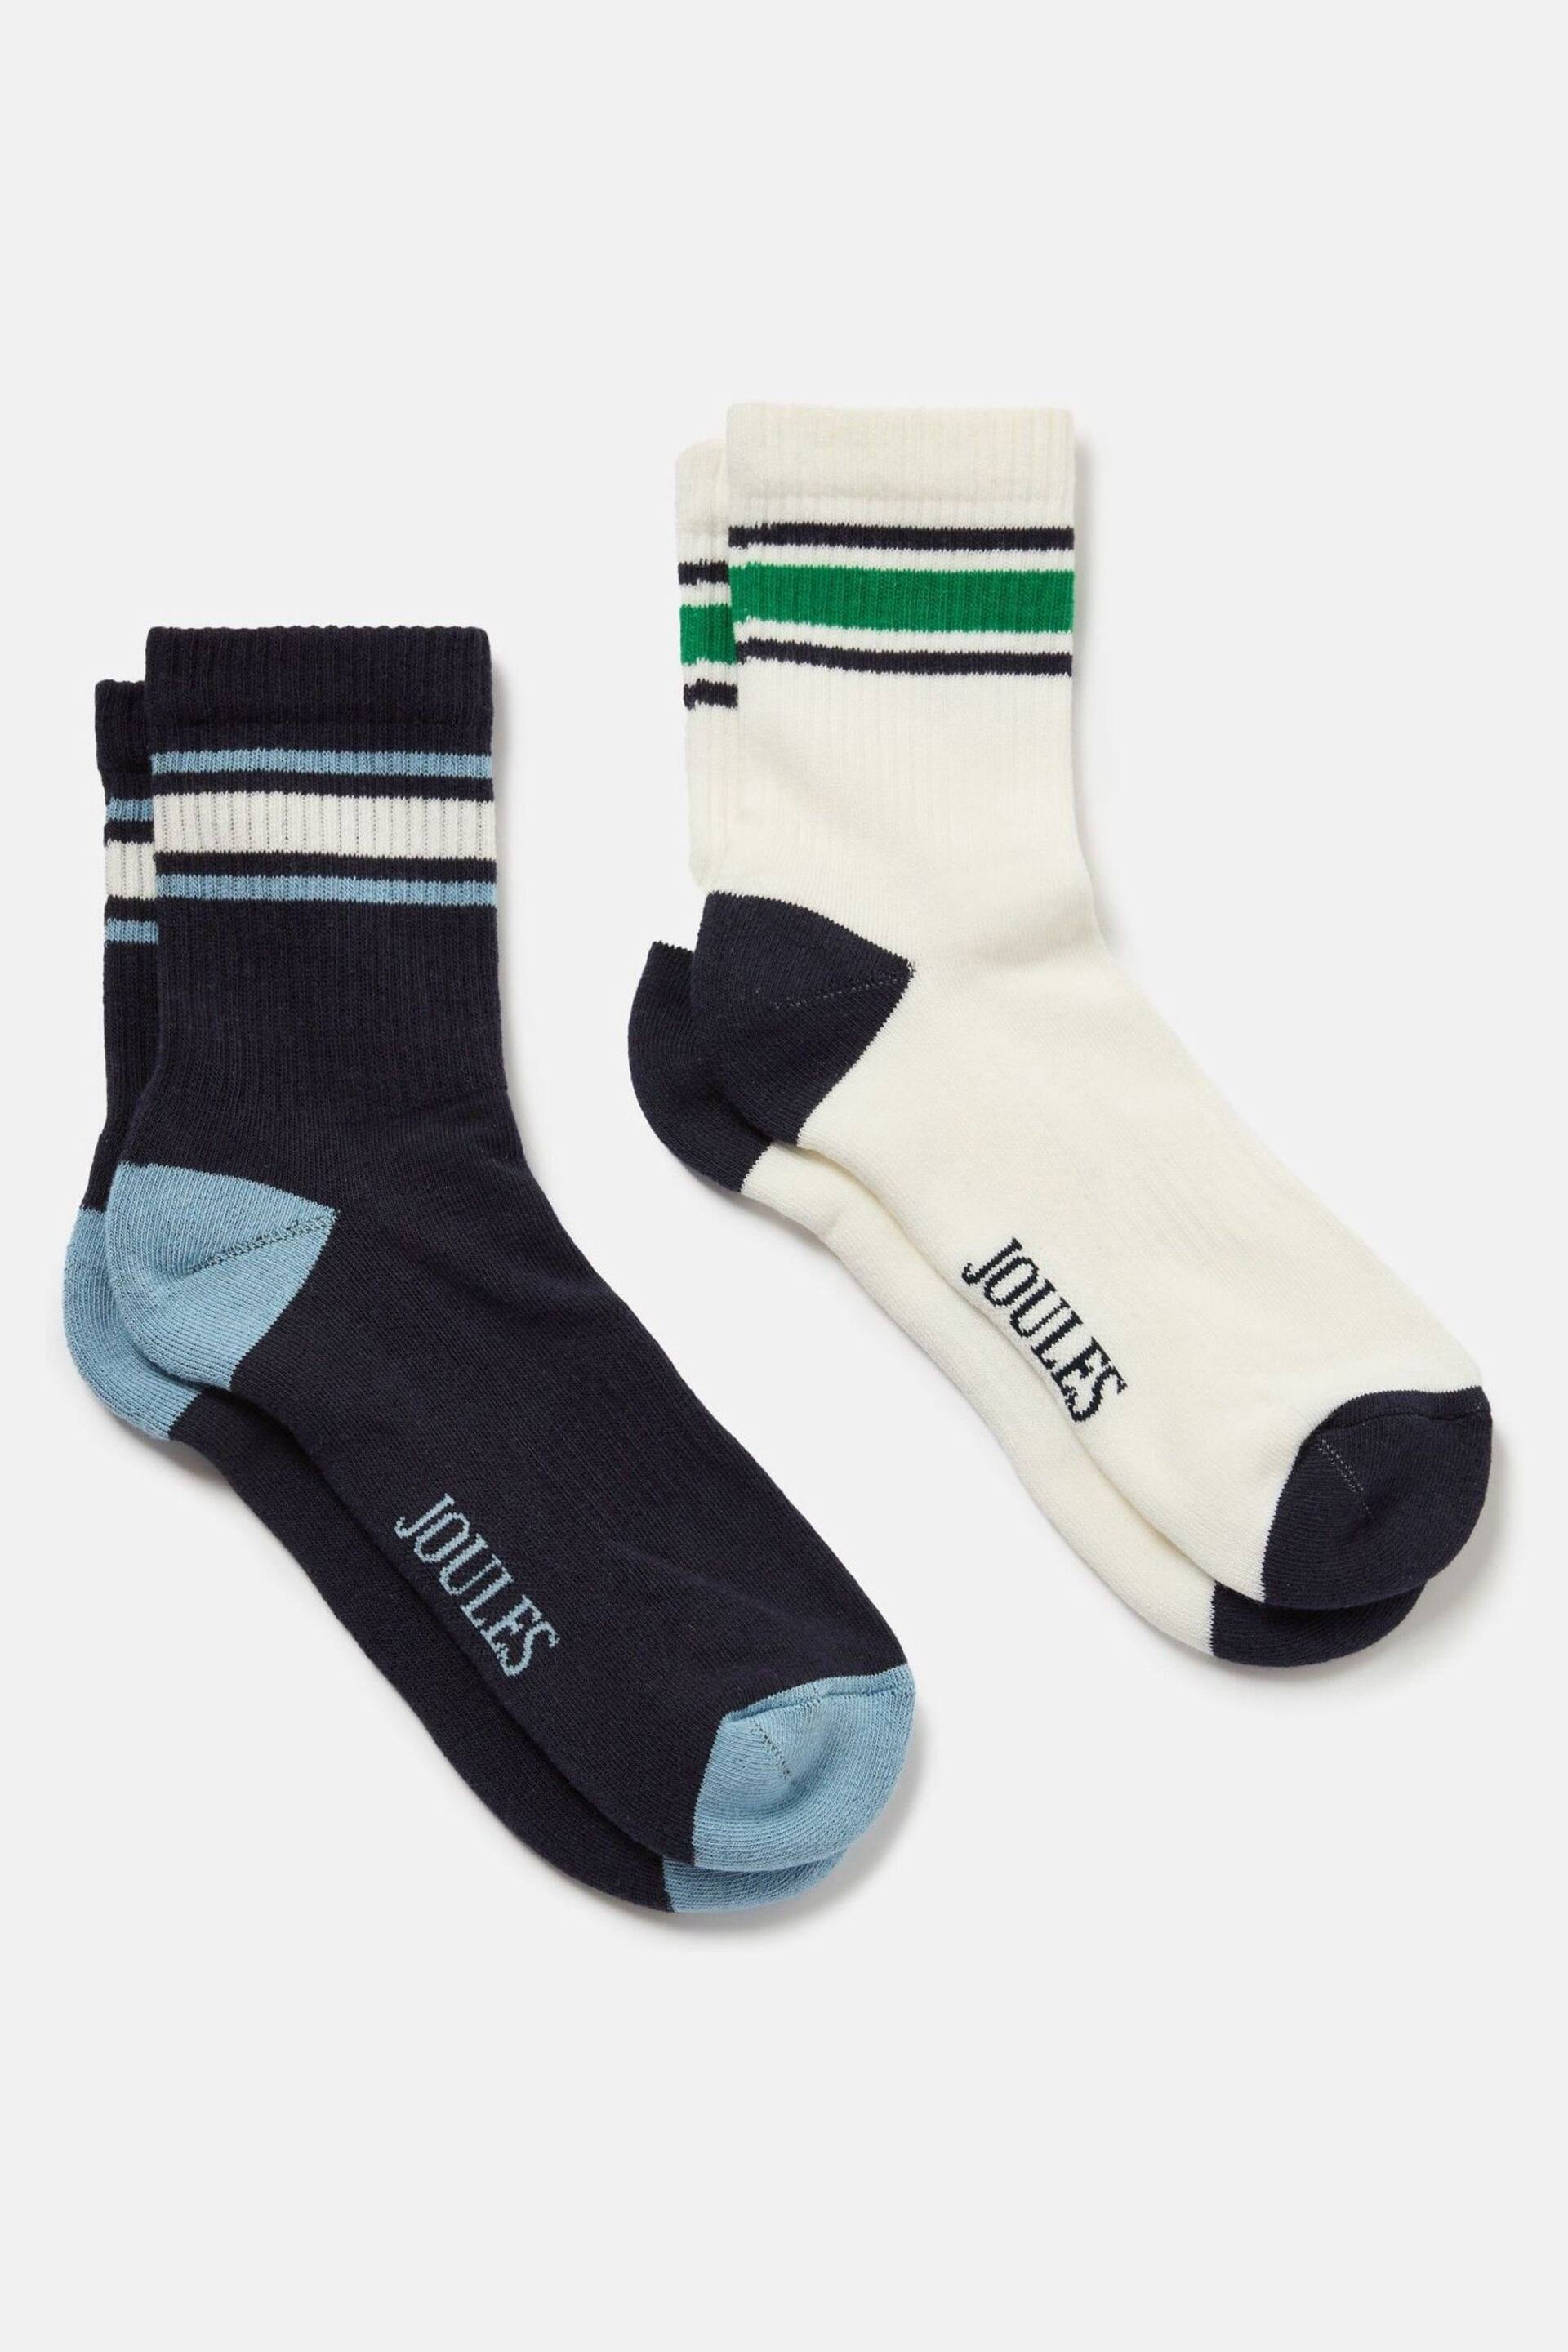 Joules Volley White/Blue Tennis Socks 2PK - Image 1 of 5